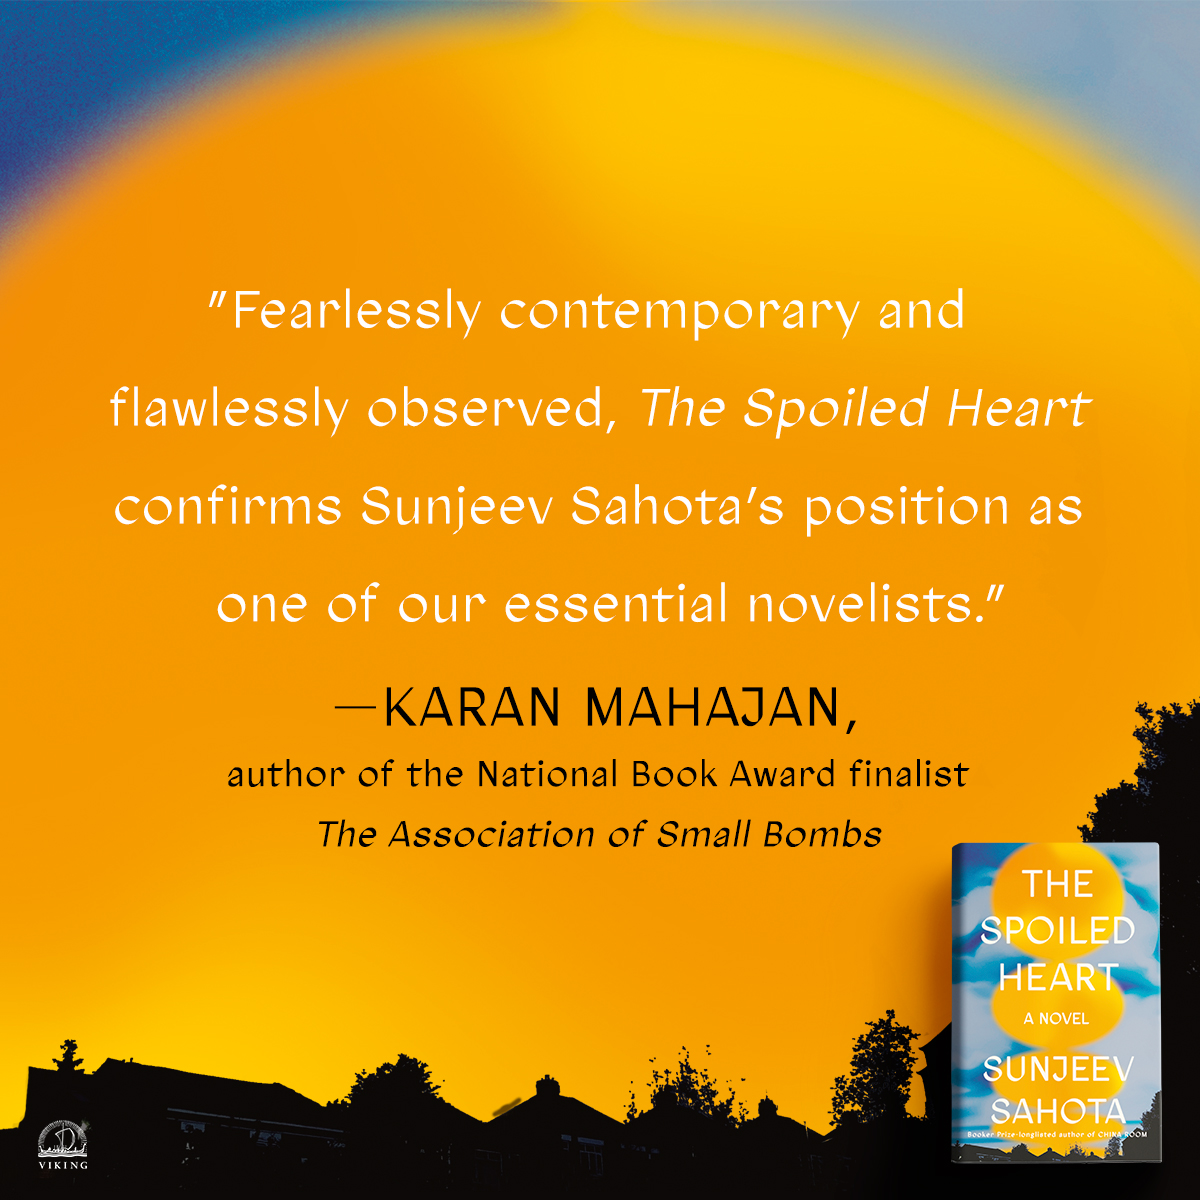 THE SPOILED HEART by Sunjeev Sahota is 'fearlessly contemporary and flawlessly observed' according to @kmahaj and we couldn't agree more! ✨ Learn more about this riveting story of ambition, love, and family secrets before it goes on sale next week: bit.ly/3Tu1jYV